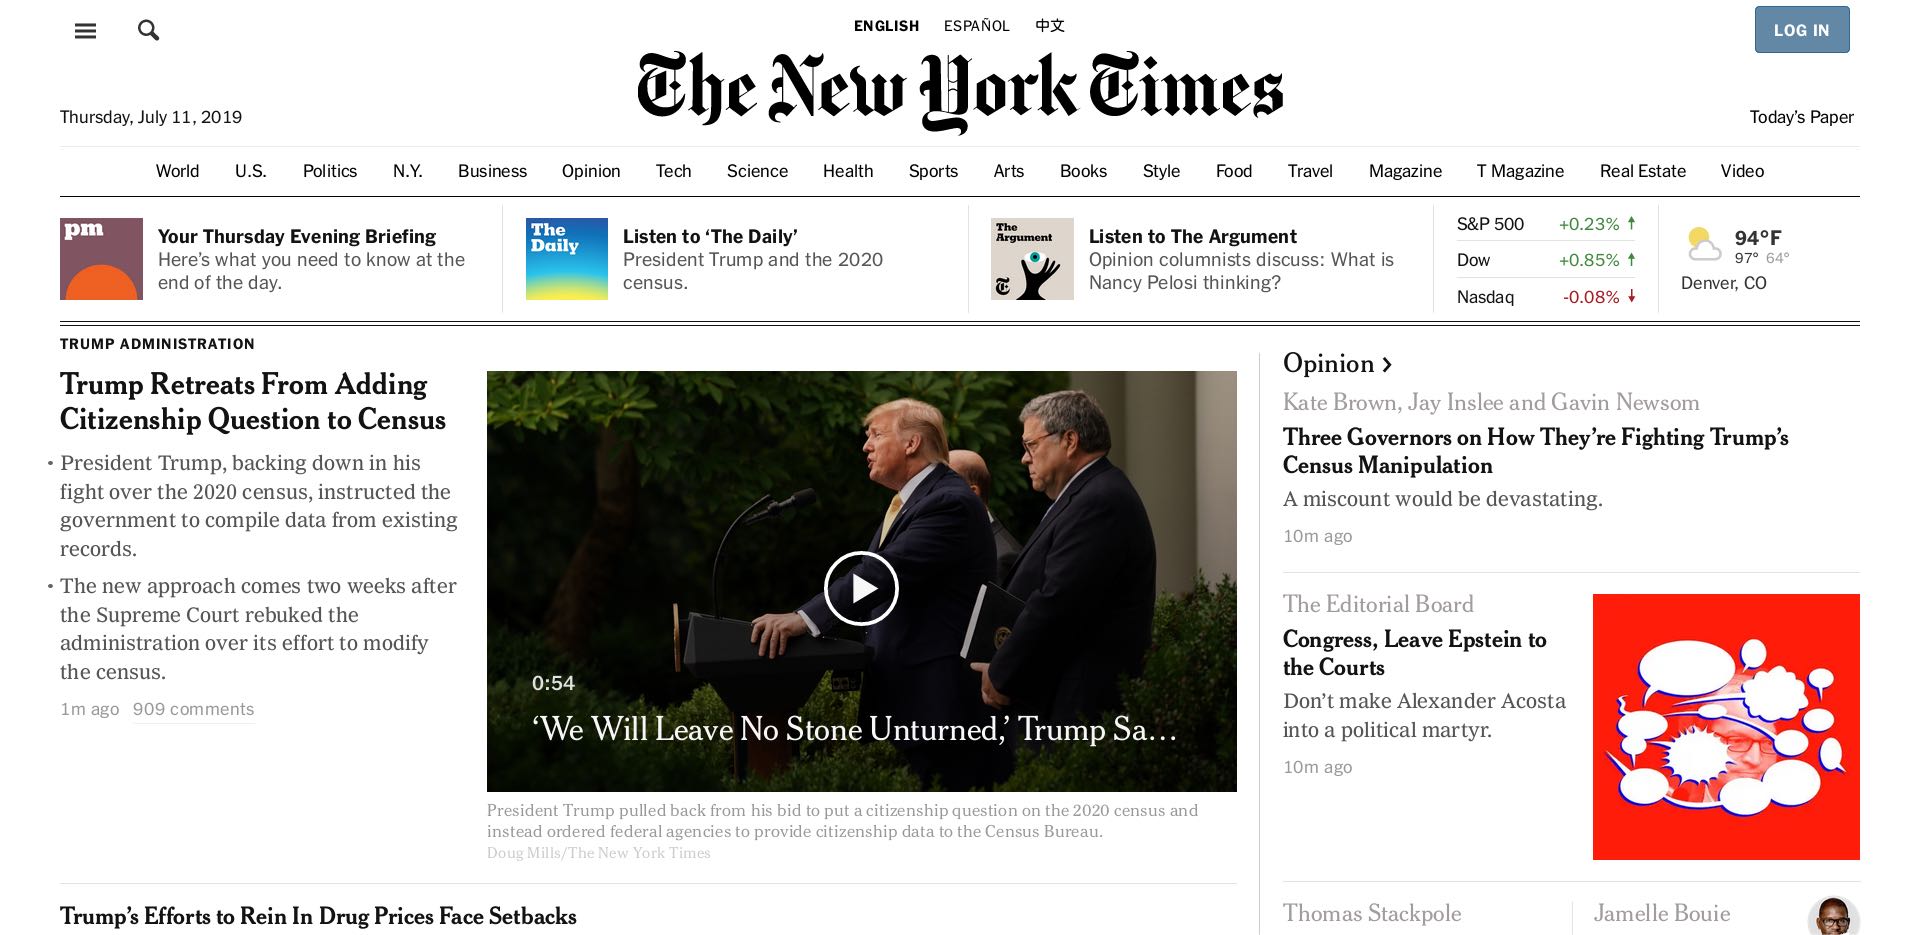 The New York Times home page on July 7, 2019 